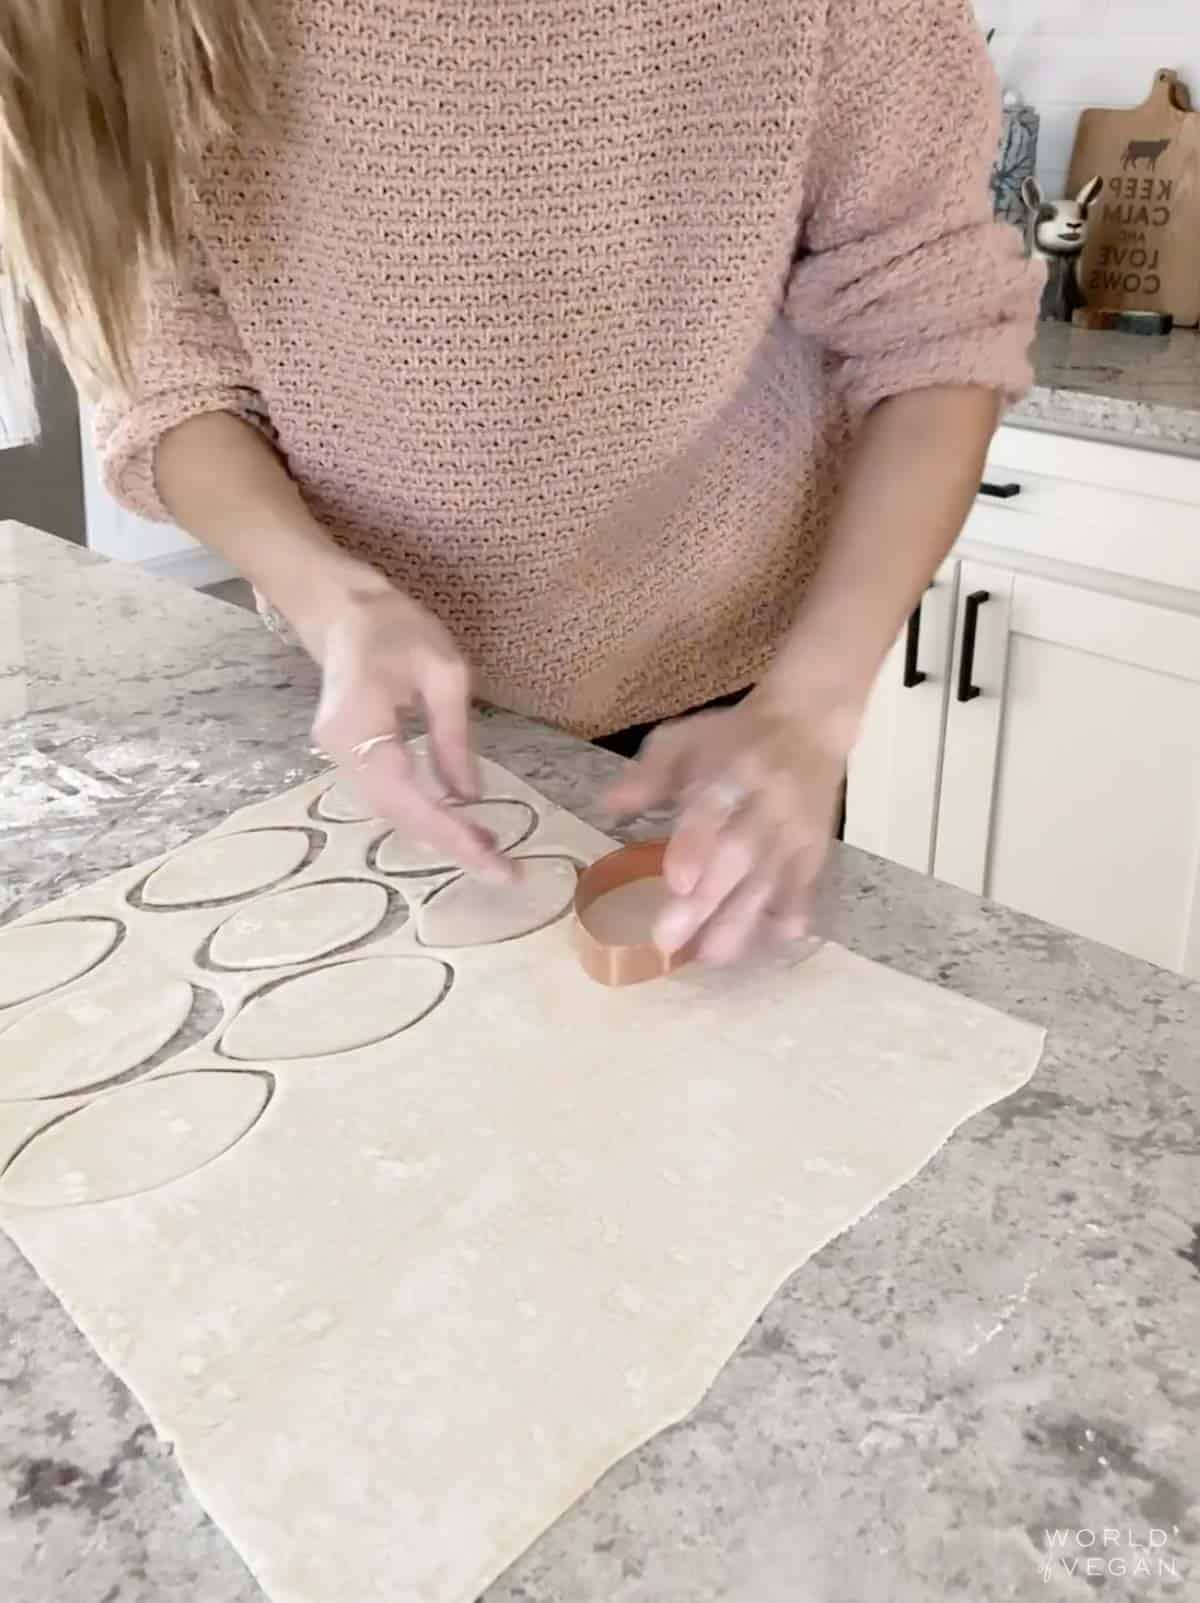 Cutting football cookie cutter shapes out of pastry dough.